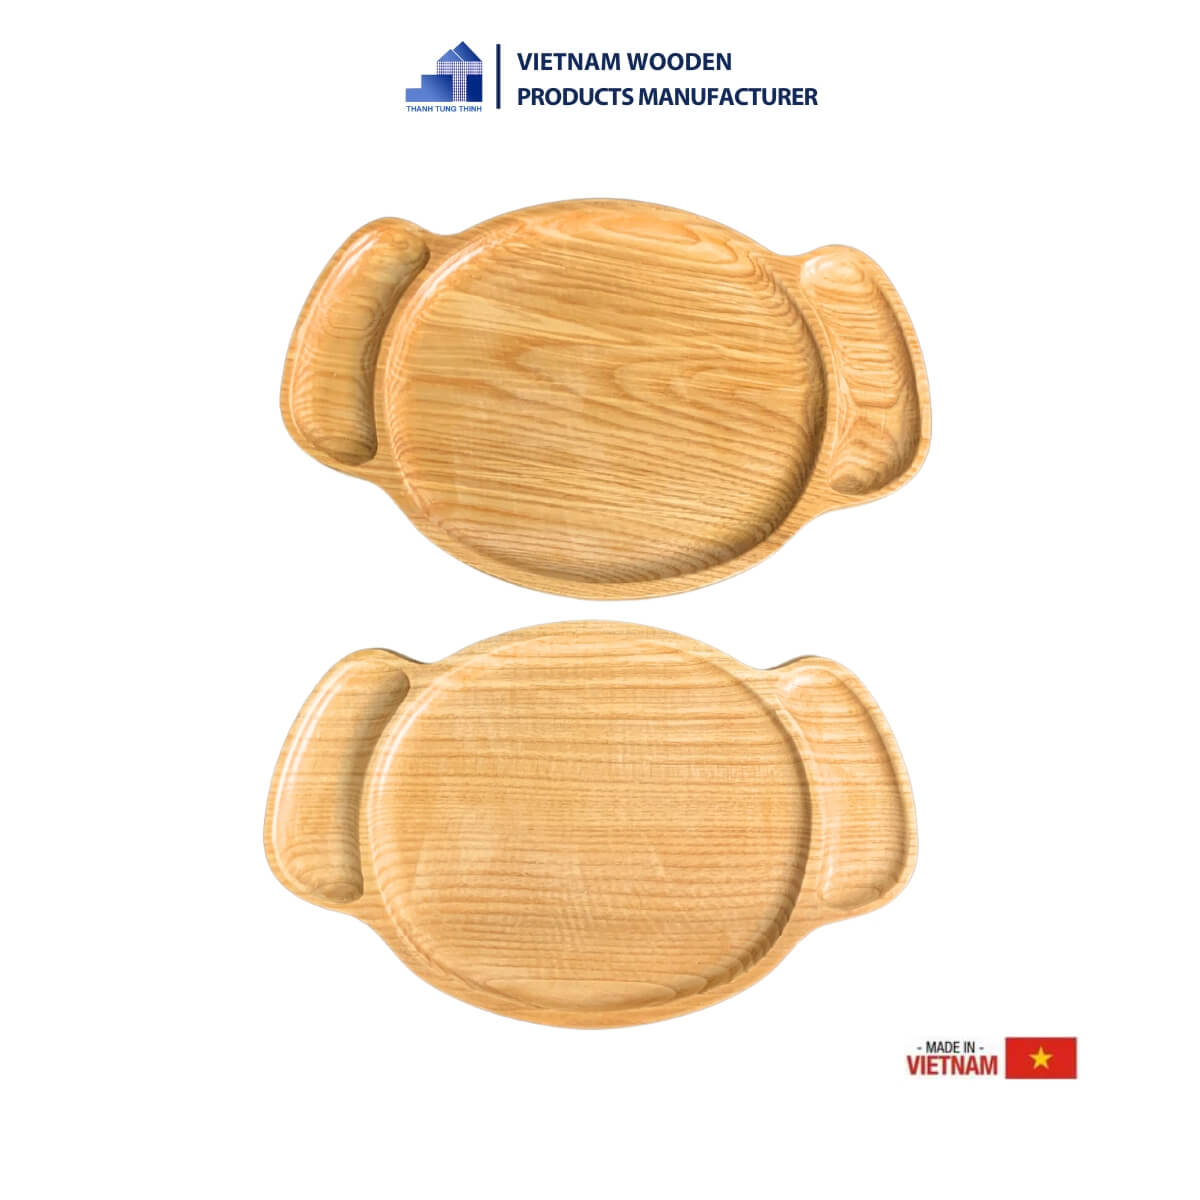 Bear Shaped Wooden Tray That Your Children Love